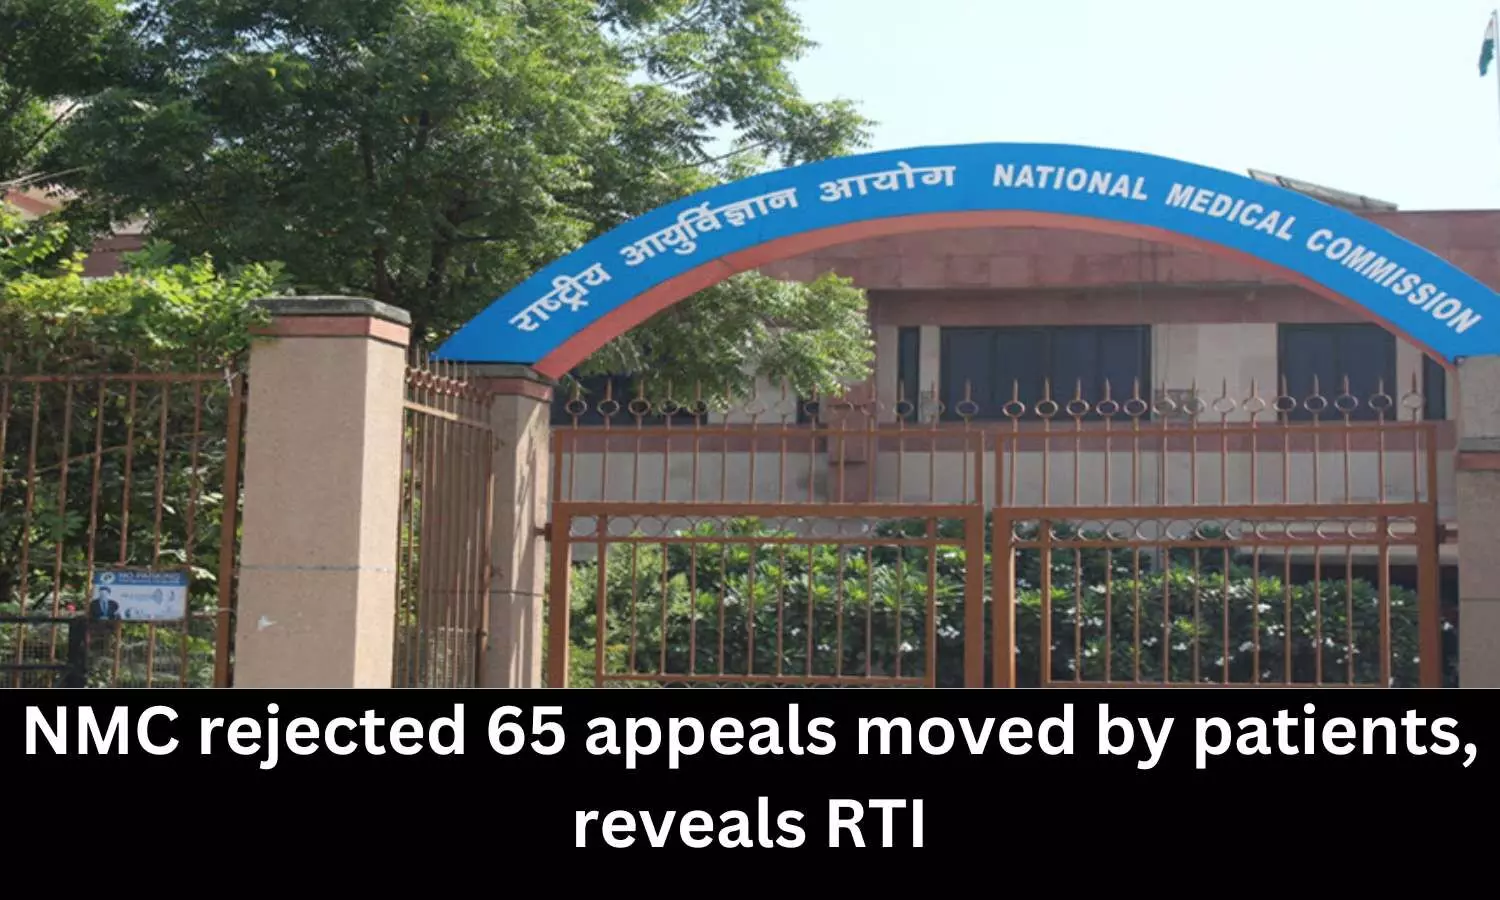 NMC turned down 65 appeals moved by patients, reveals RTI